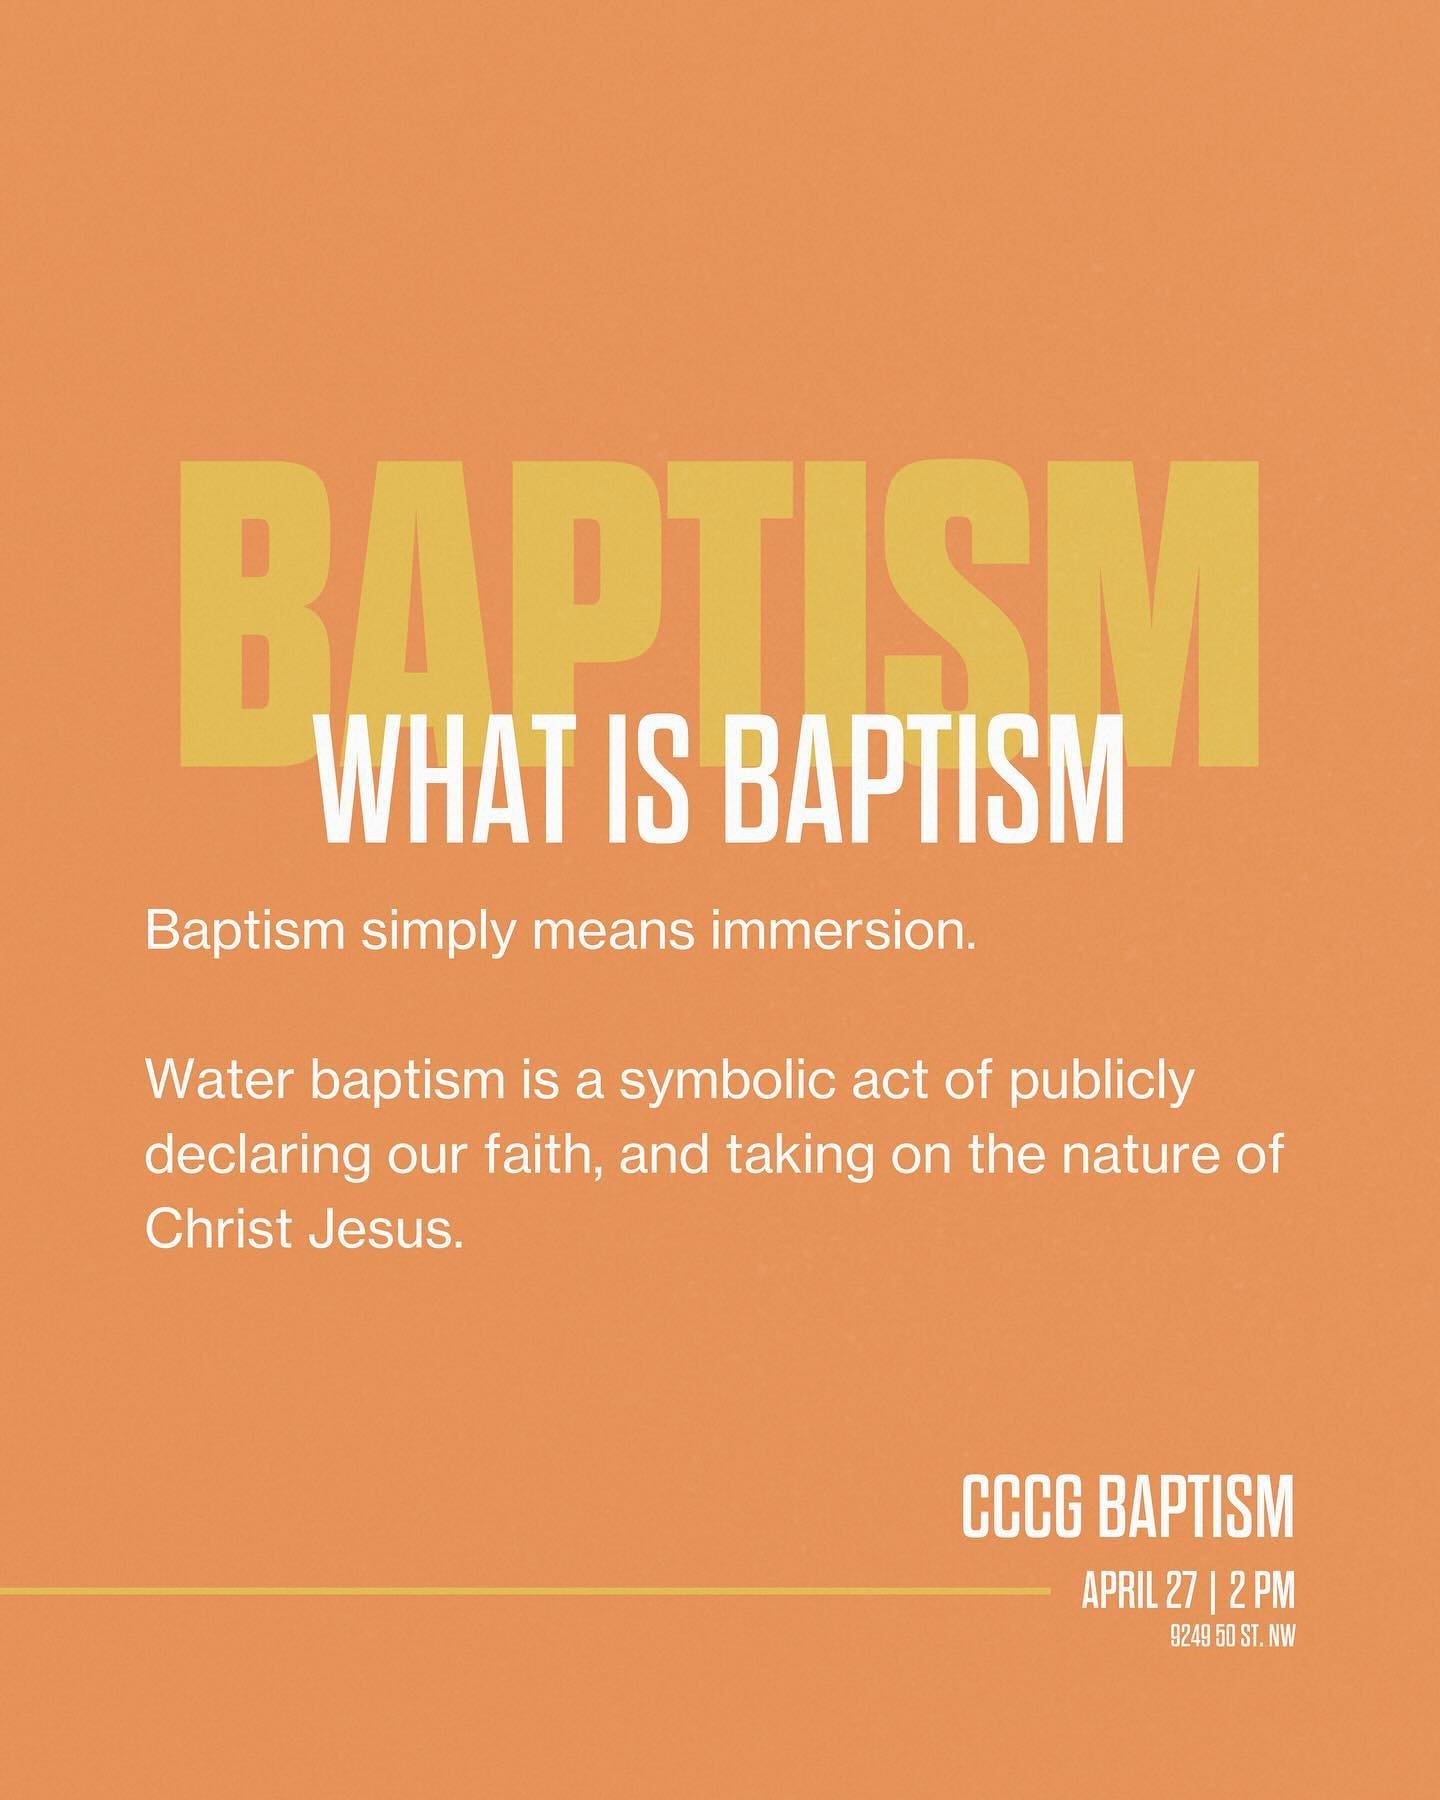 Don&rsquo;t miss this chance to publicly declare and embrace your faith on April 27th! Register for baptism now!